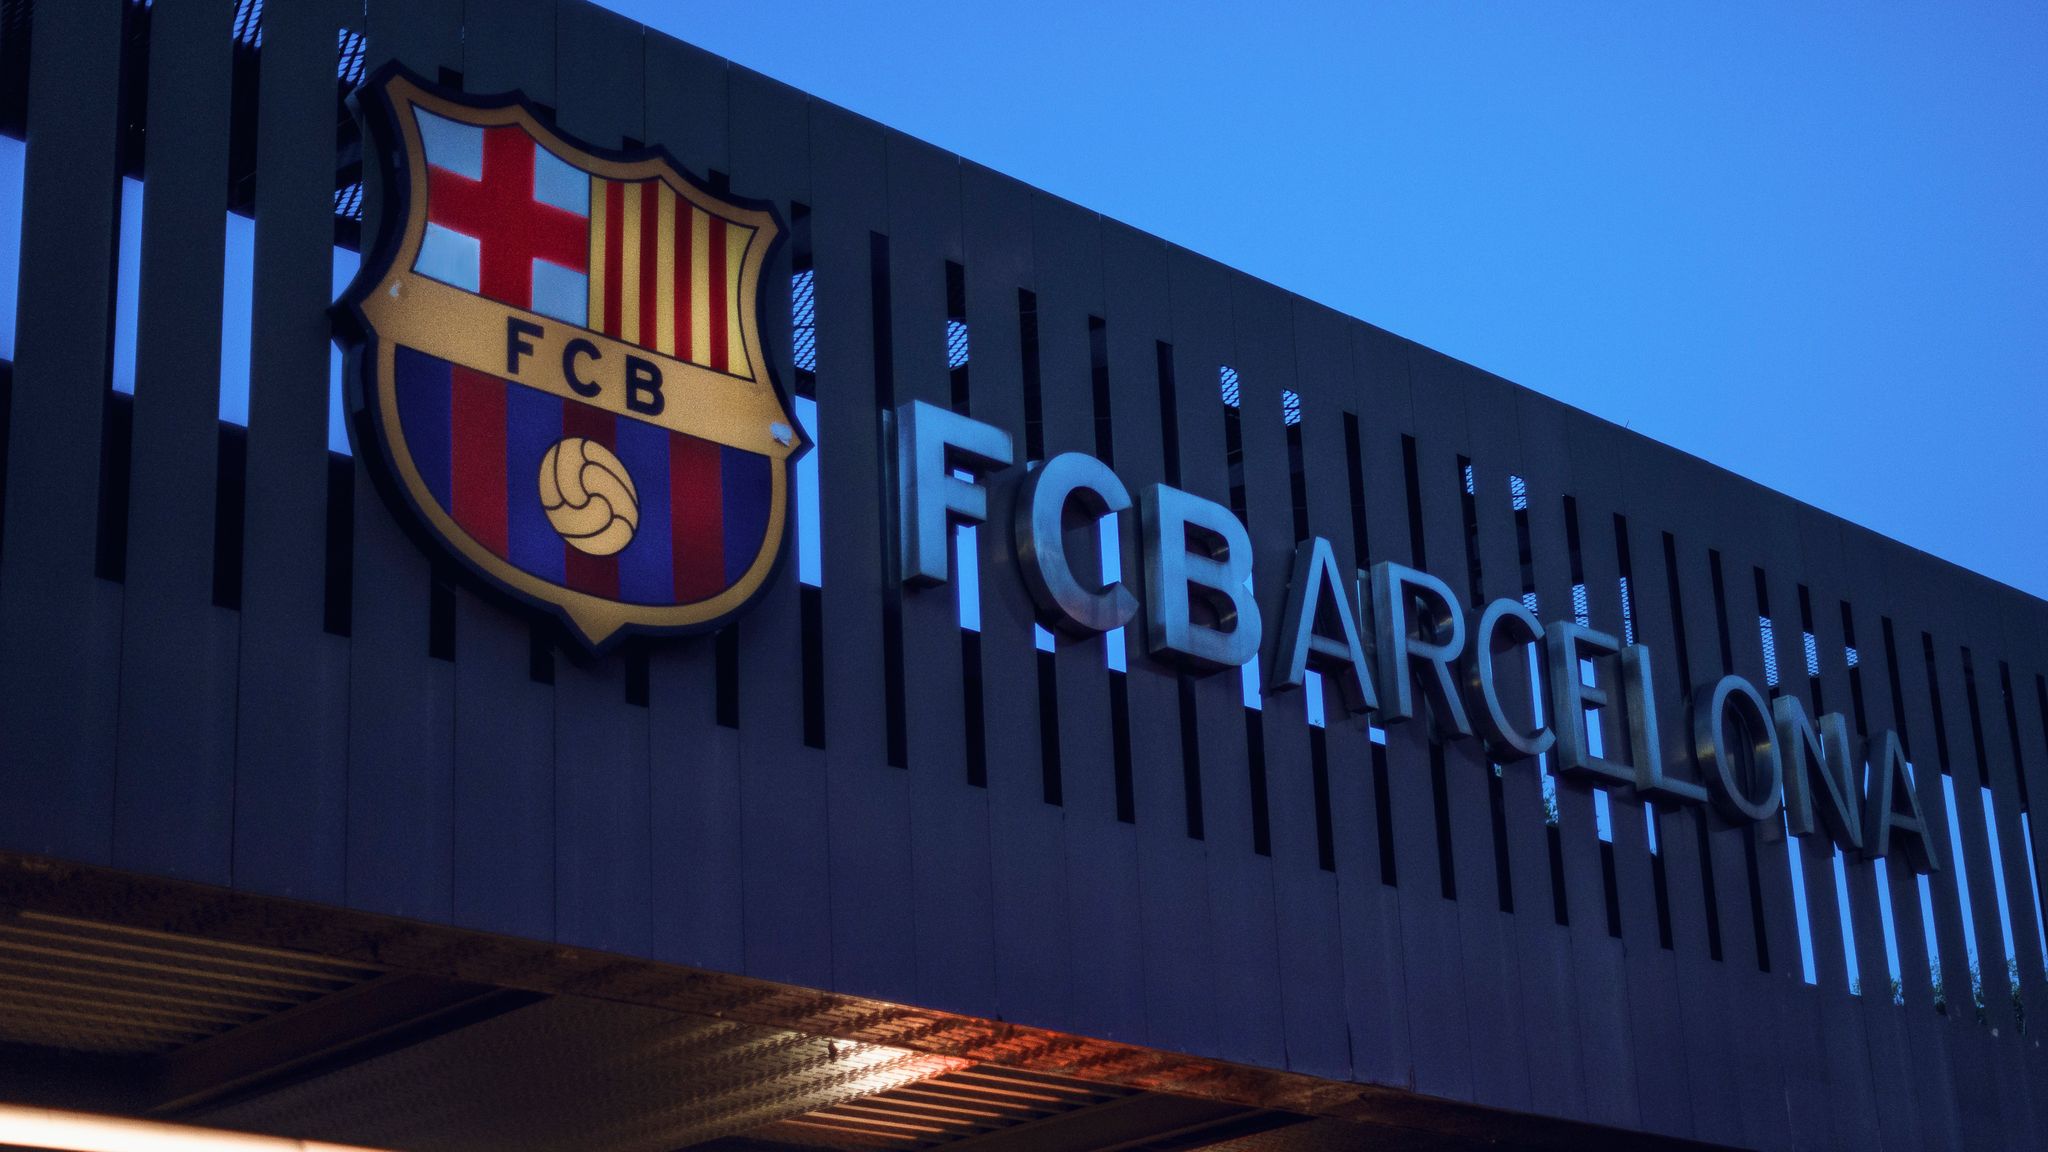 Barcelona join Real Madrid in rejecting La Liga's proposed CVC investment |  Football News | Sky Sports